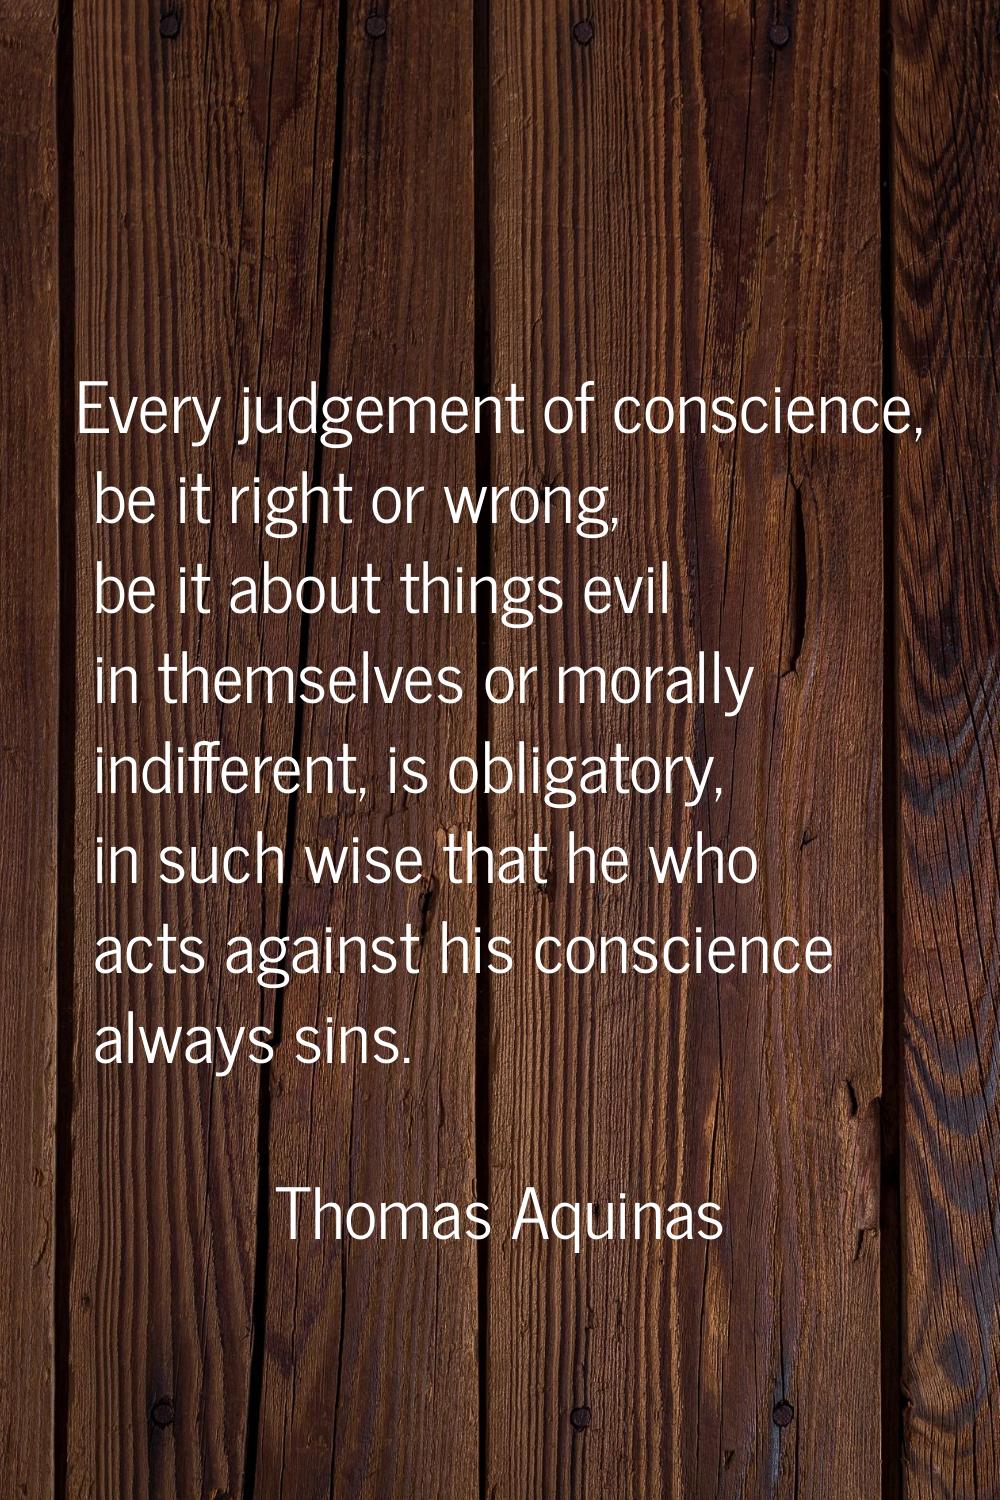 Every judgement of conscience, be it right or wrong, be it about things evil in themselves or moral